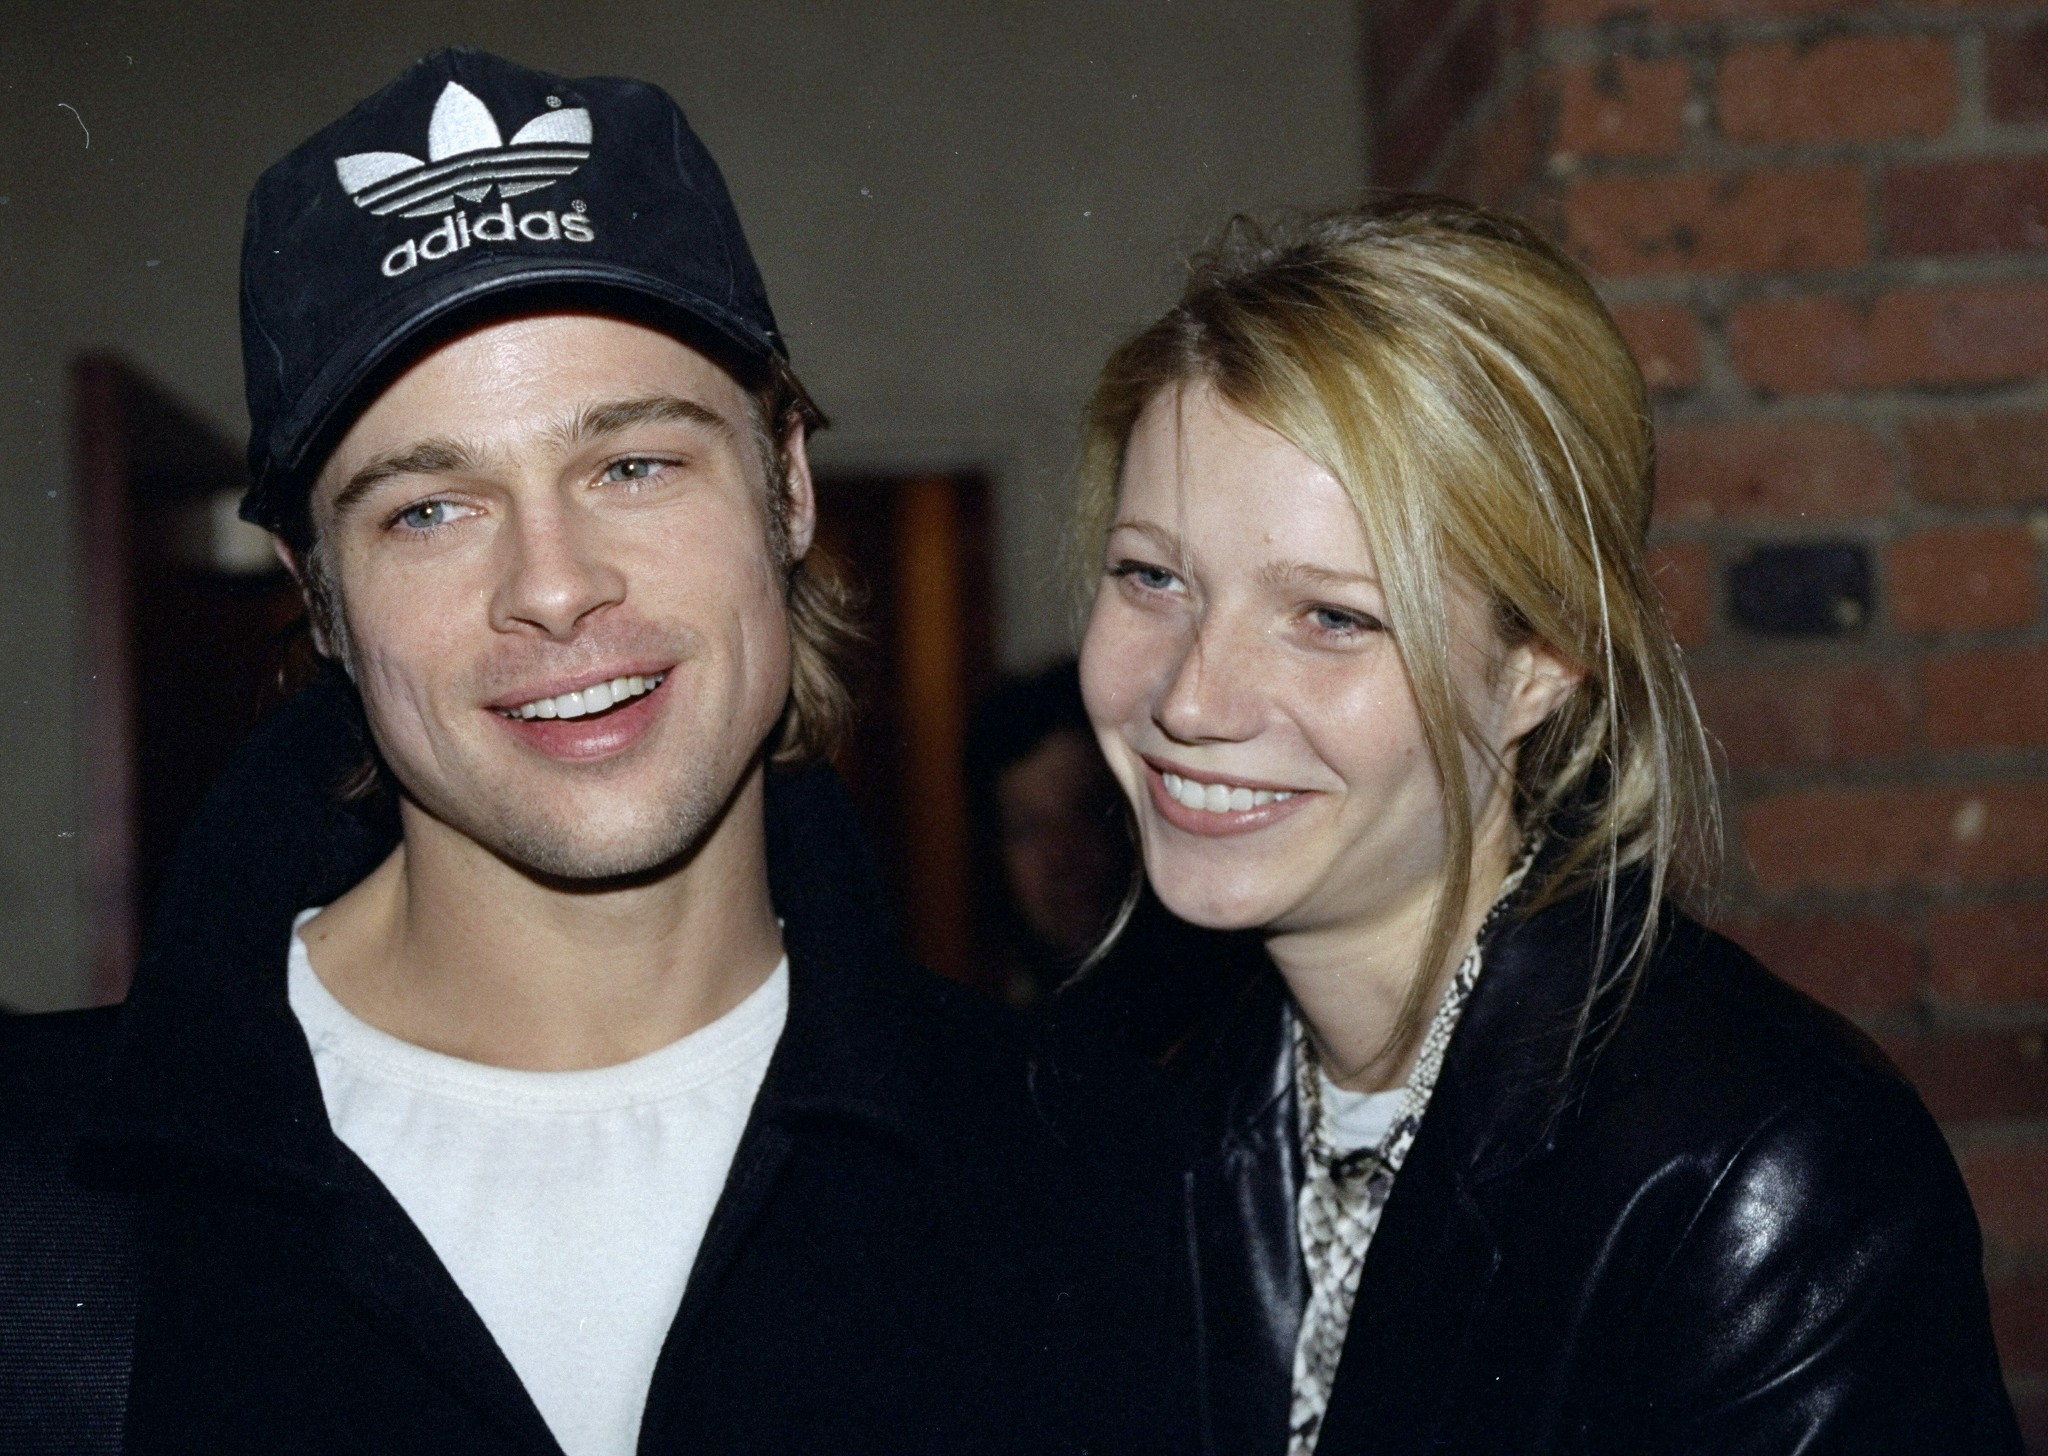 Brad Pitt and Gwyneth Paltrow at the screening of "Fargo" on March 6, 1996 | Source: Getty Images